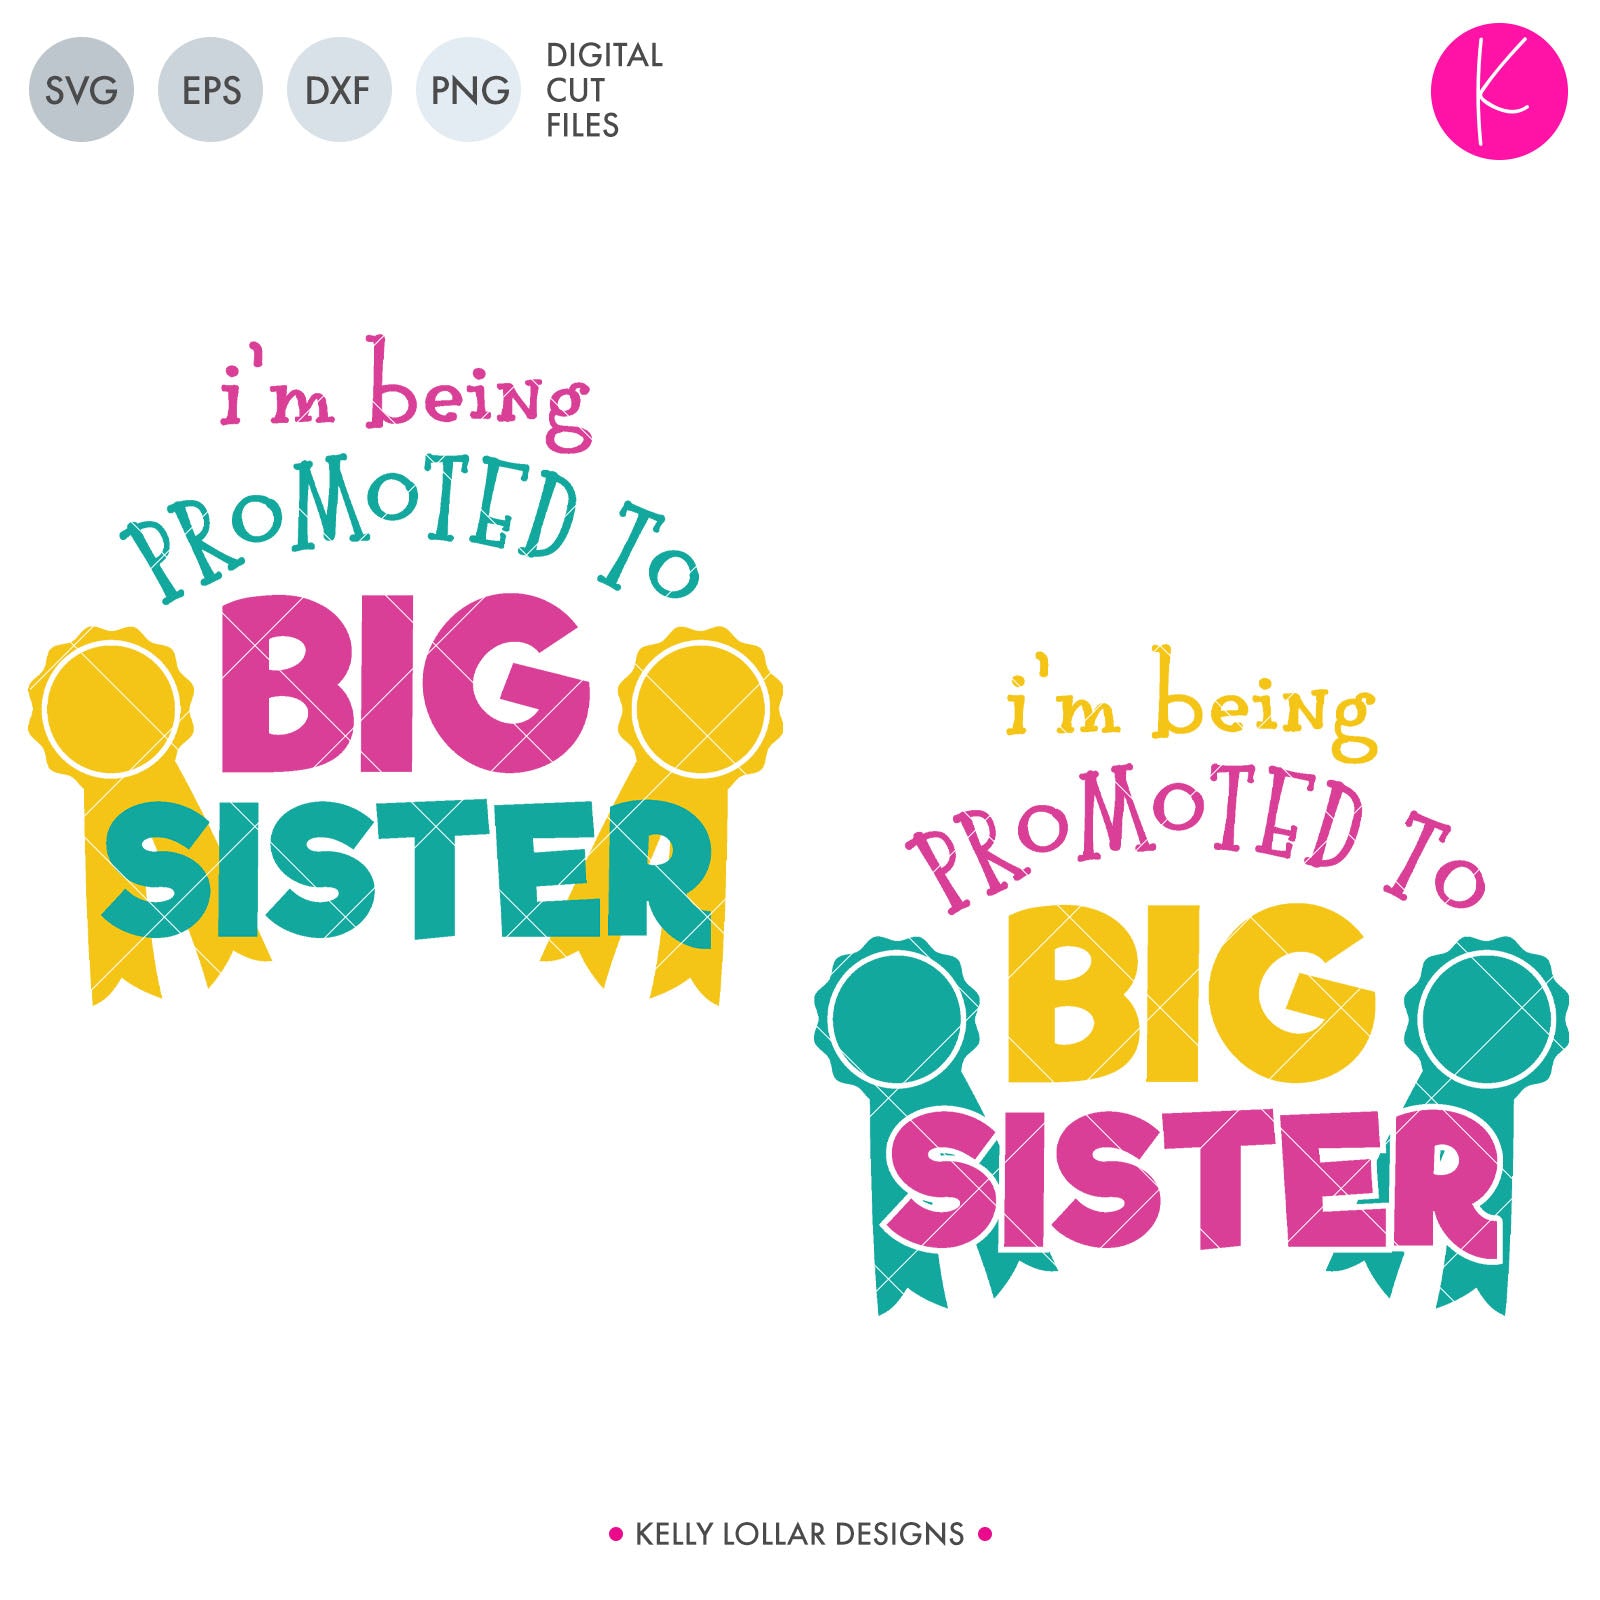 promoted to big sister